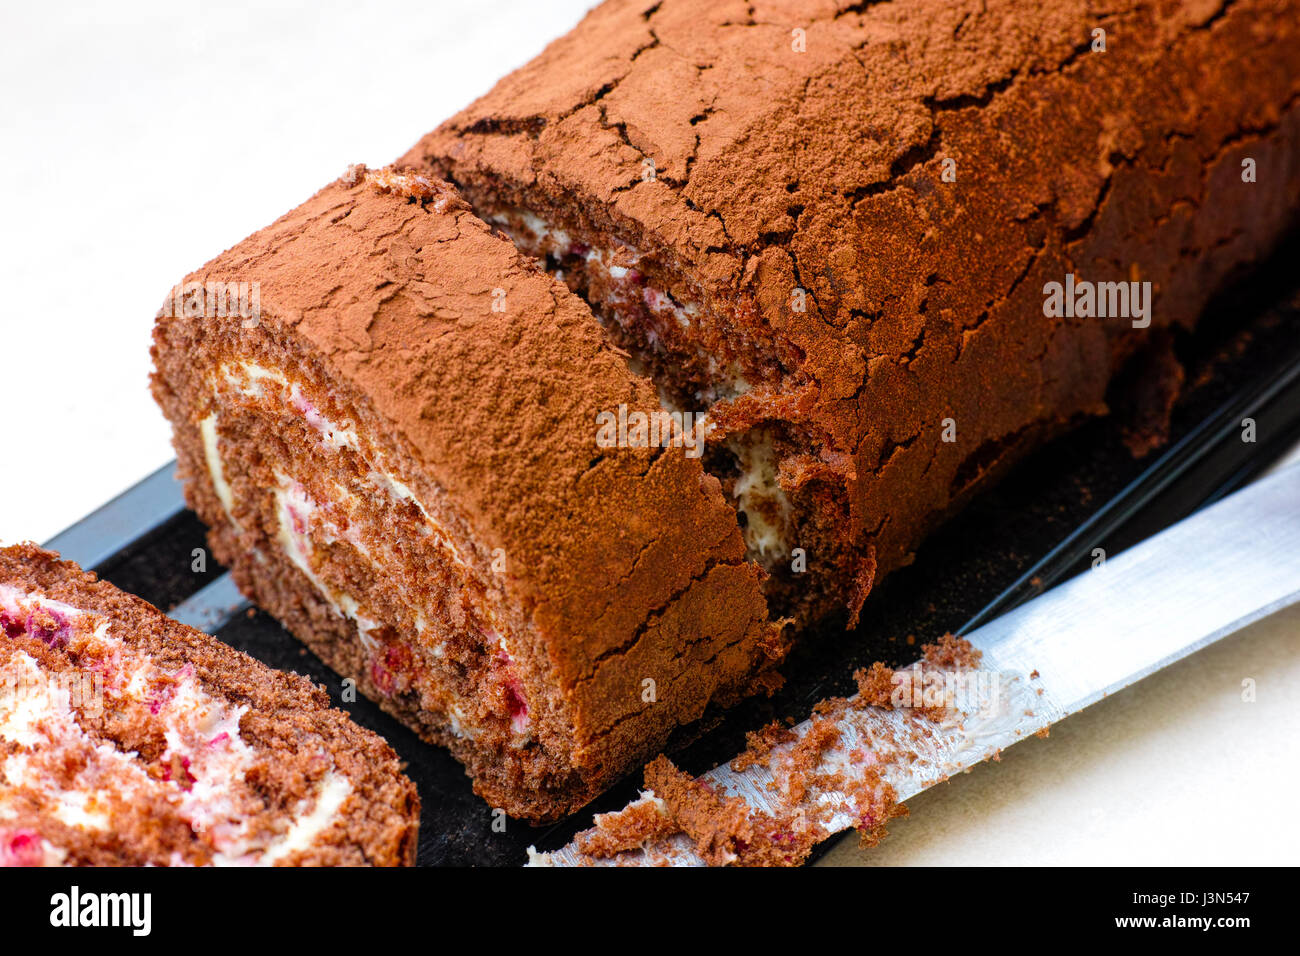 Slices of tasty chocolate sponge cake roll with cream and knife. Stock Photo